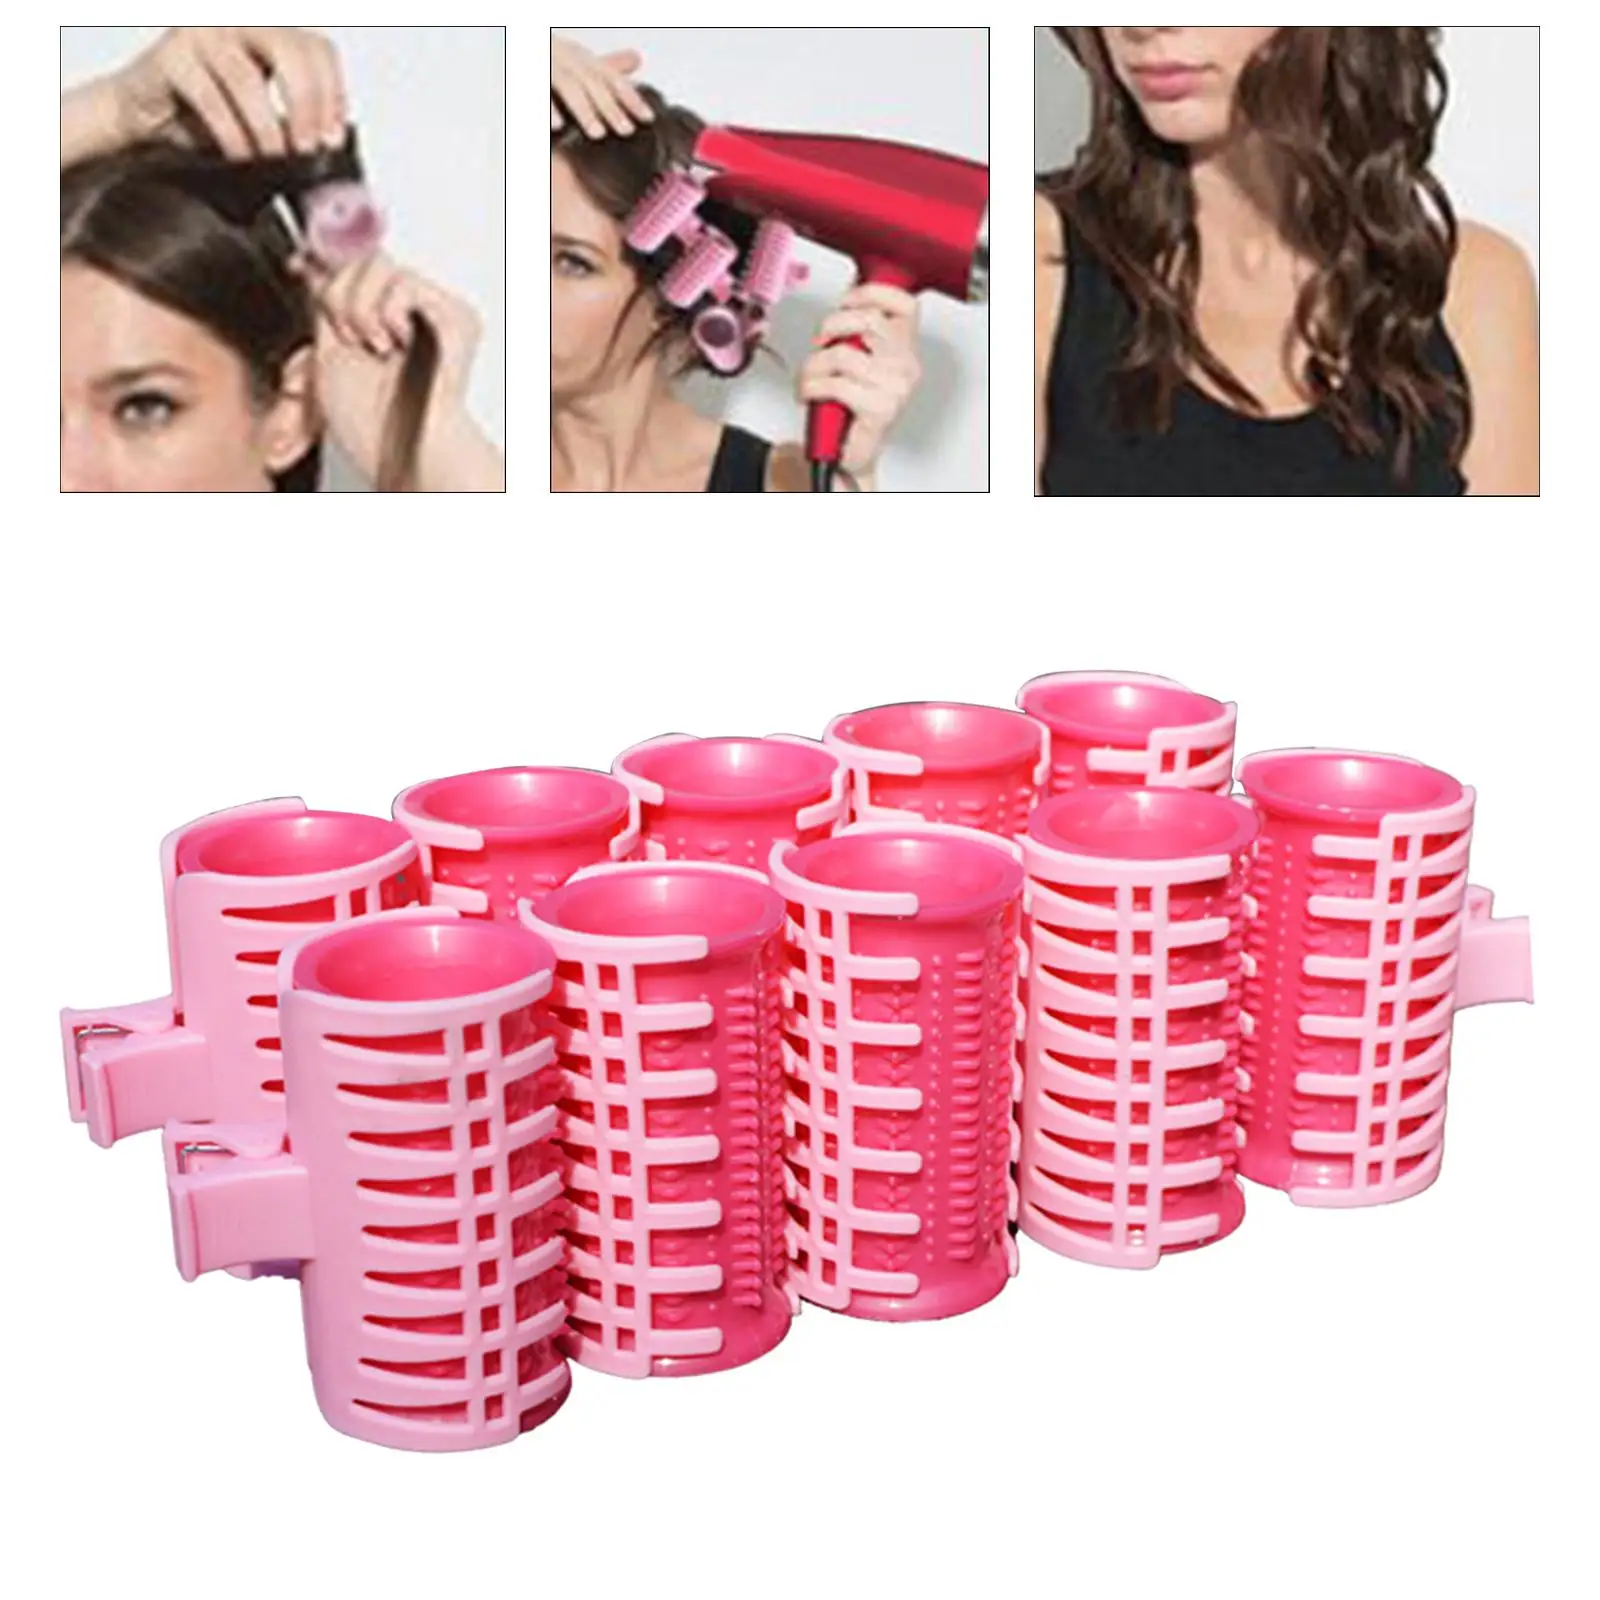 Roller Curlers Air Protable Candy Color Hairdressing Self Supporting Beauty Set for Hair Salon DIY Facial Care 